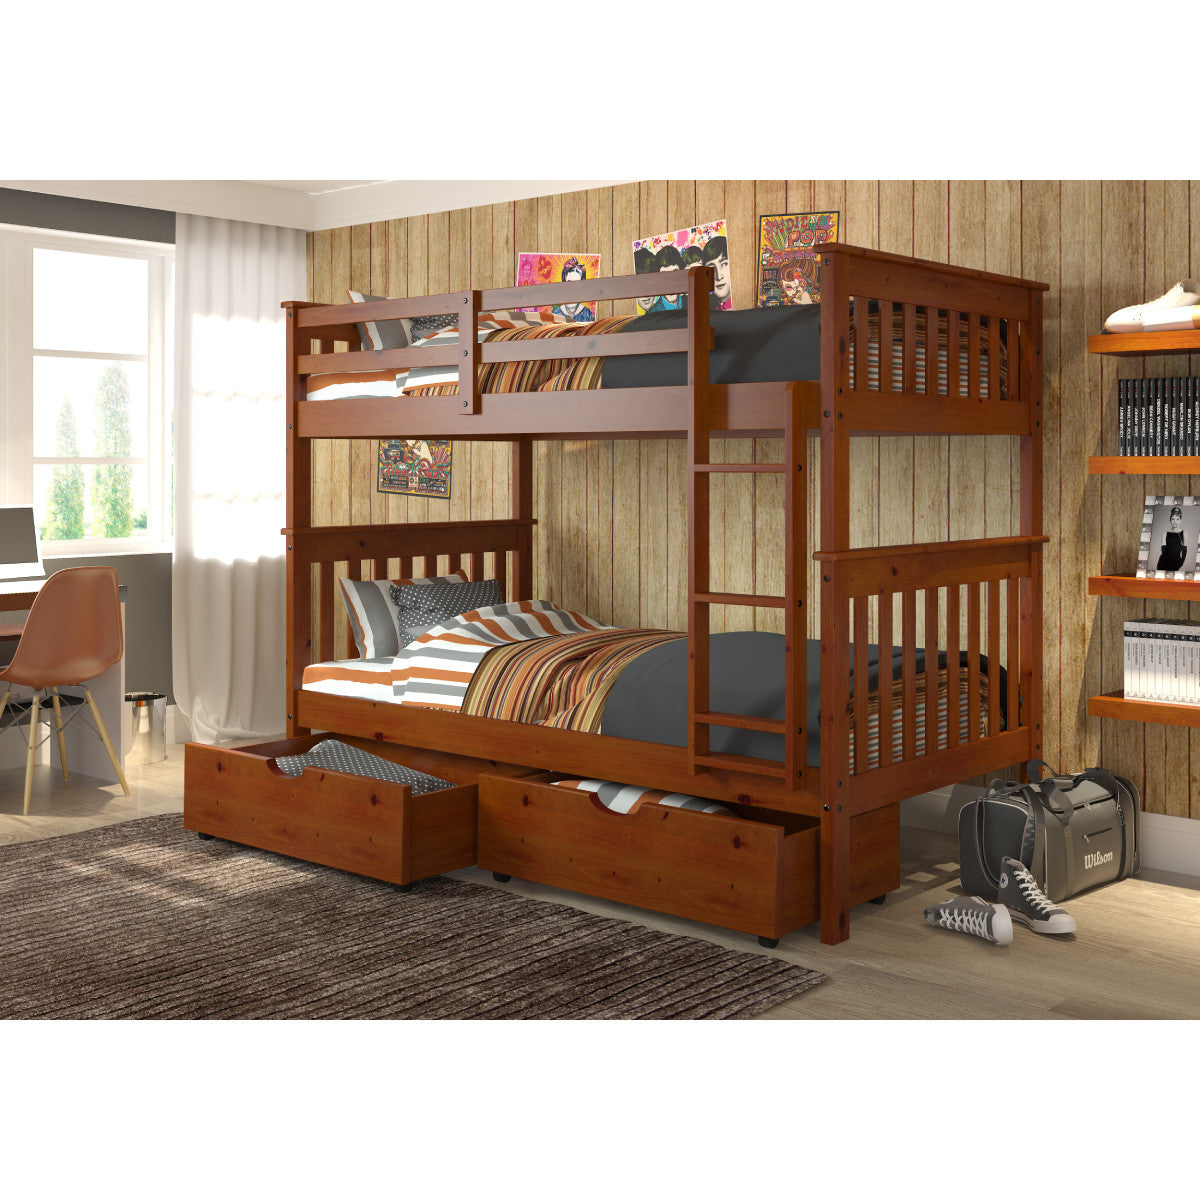 TWIN/TWIN MISSION BUNK BED WITH UNDER BED DRAWERS IN LIGHT ESPRESSO FINISH